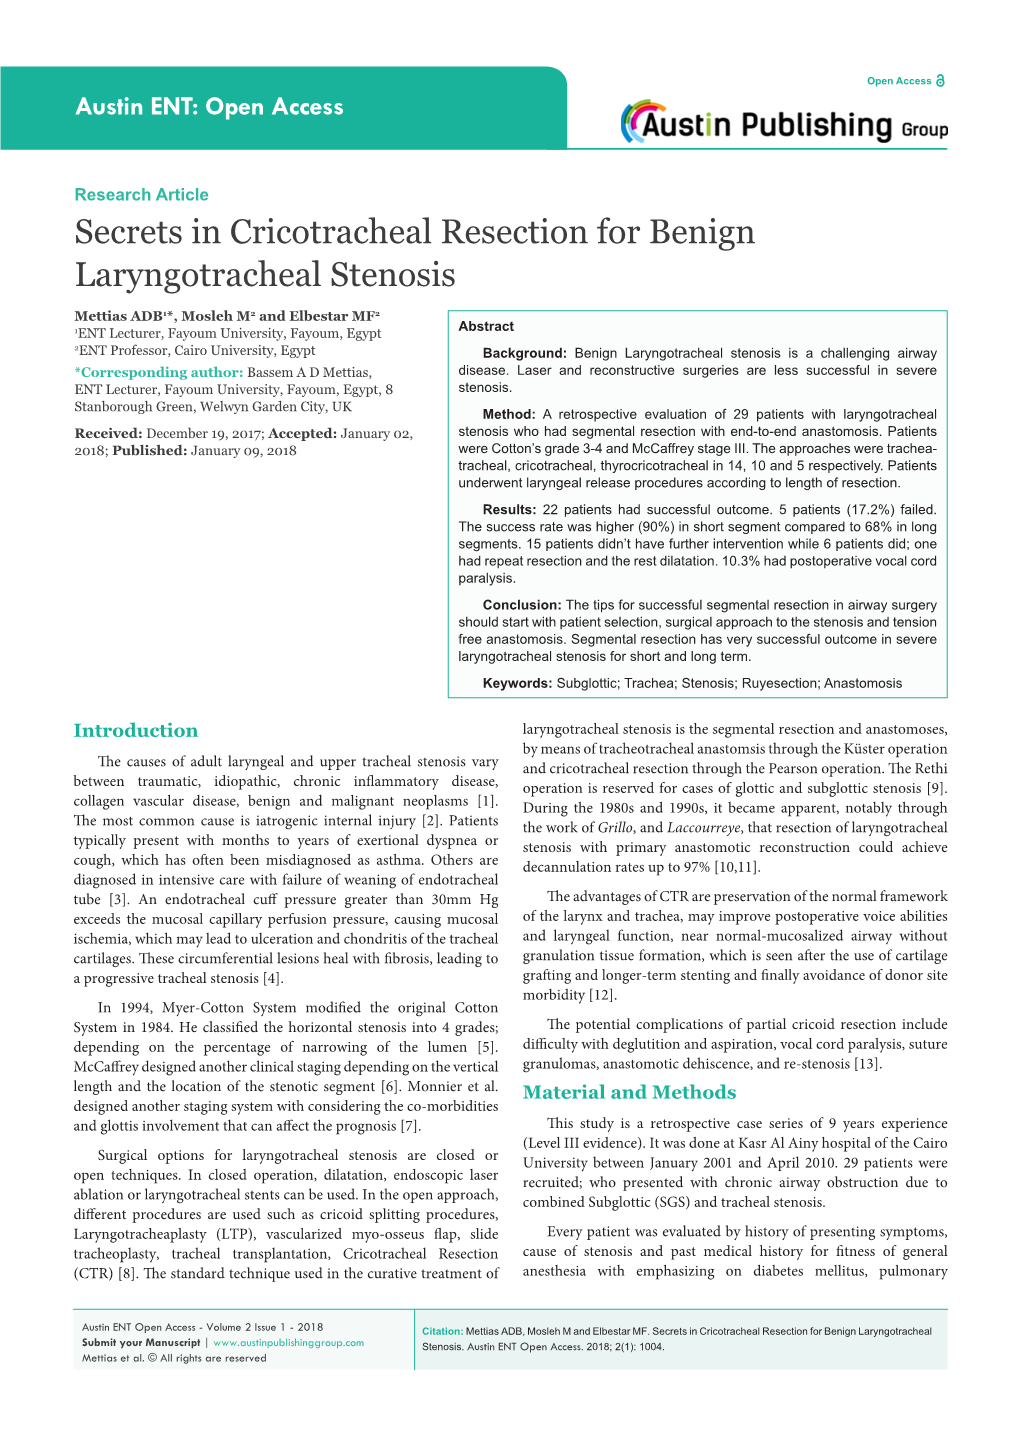 Secrets in Cricotracheal Resection for Benign Laryngotracheal Stenosis